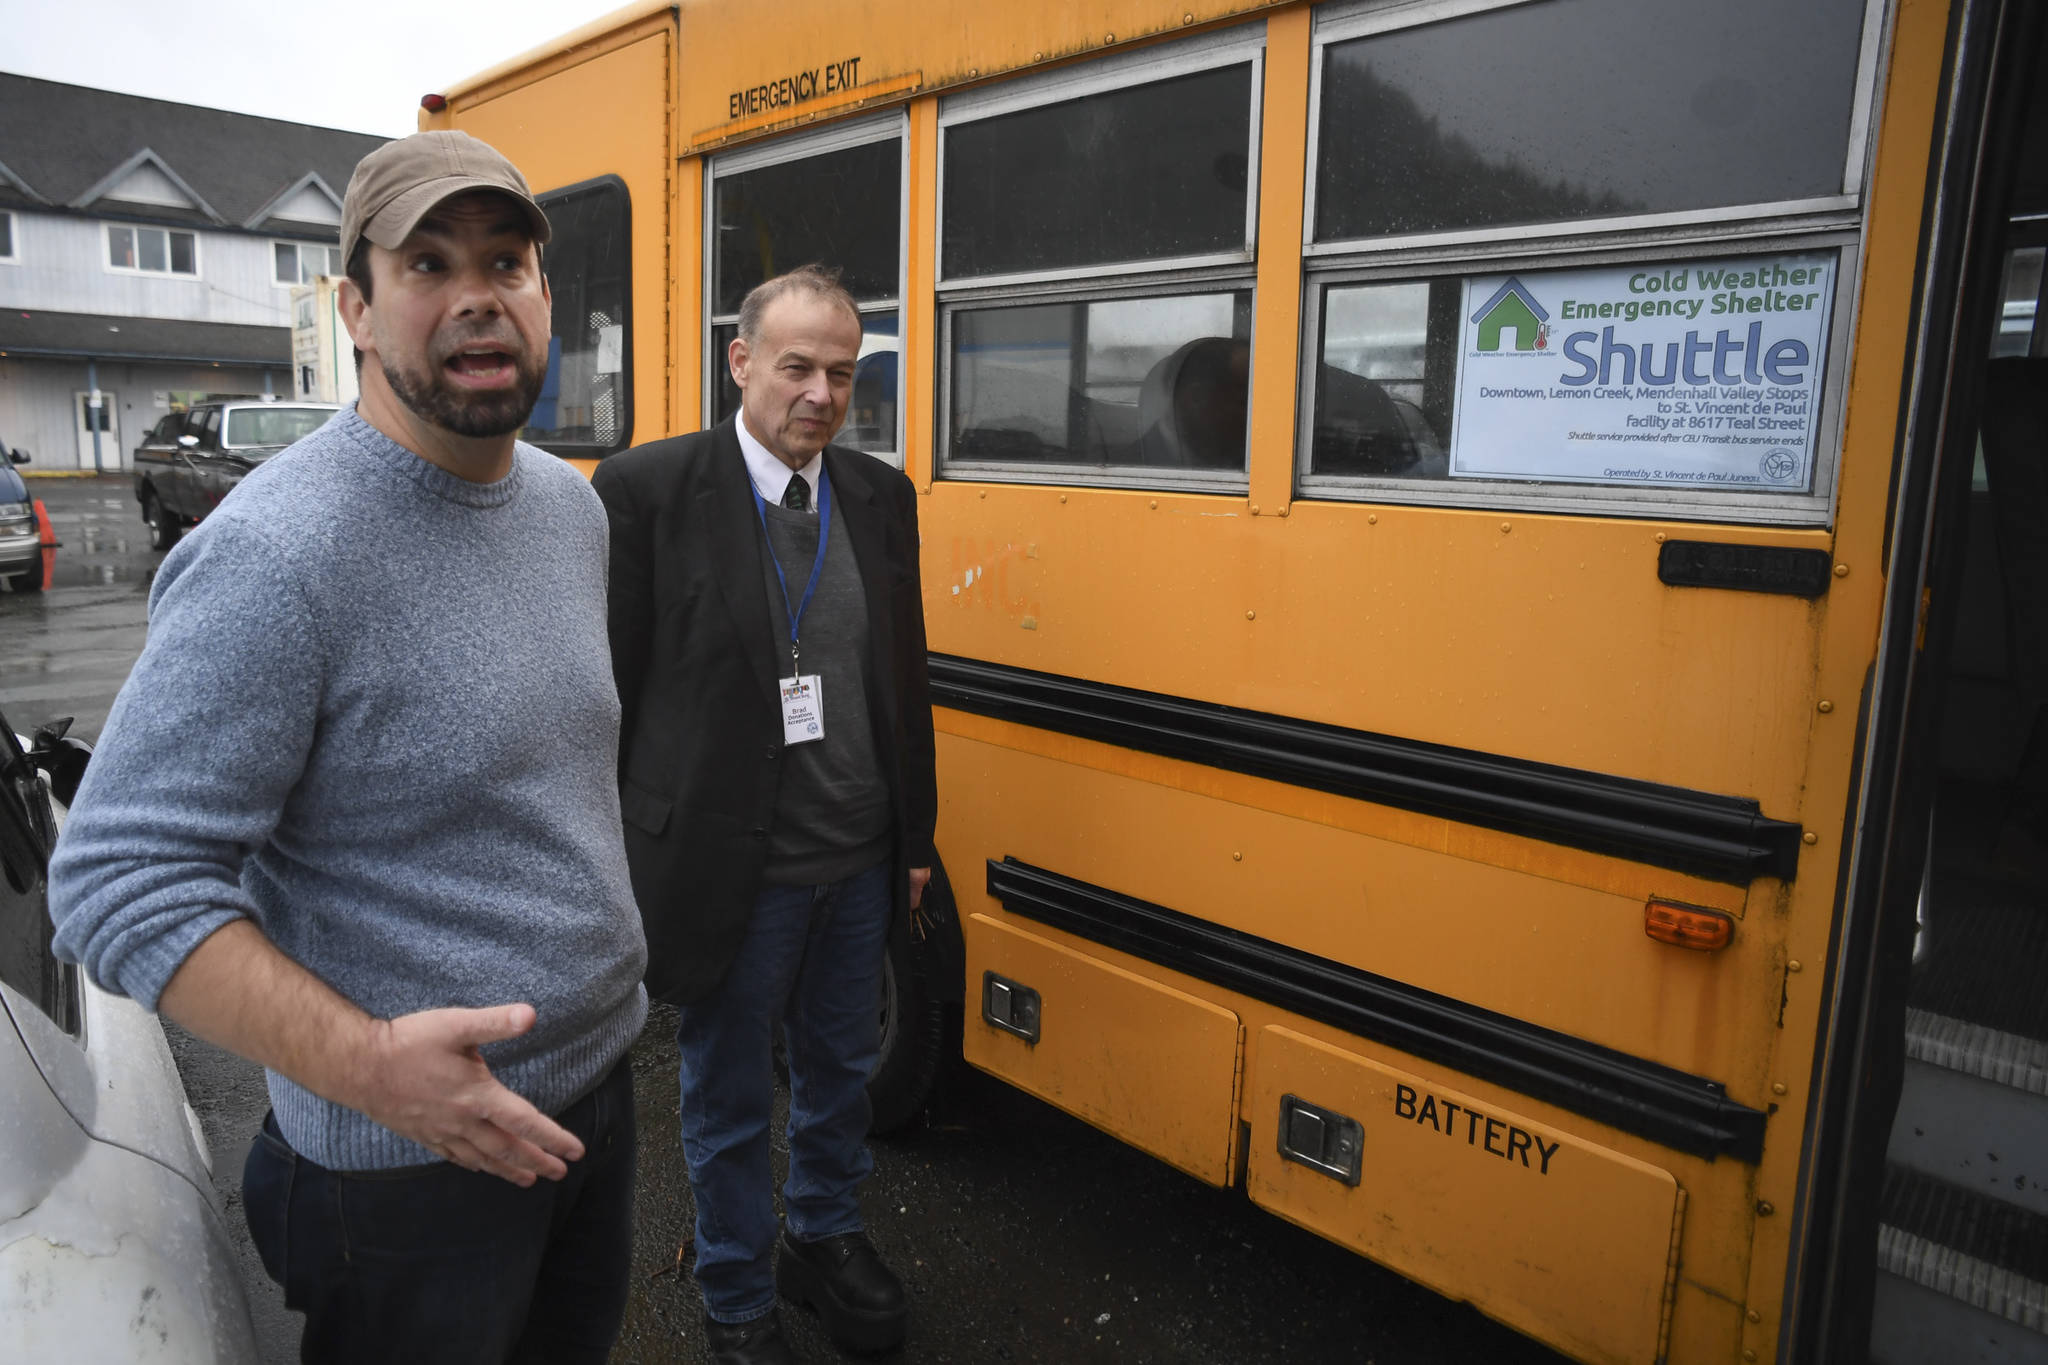 Cold Weather Emergency Shelter Manager Richard Cole, left, and St. Vincent de Paul Society Juneau General Manager Bradley Perkins show their used school bus on Wednesday, Nov. 20, 2019, that will be used to transport people needing a warm place to sleep to the shelter at St. Vincent de Paul. (Michael Penn | Juneau Empire)